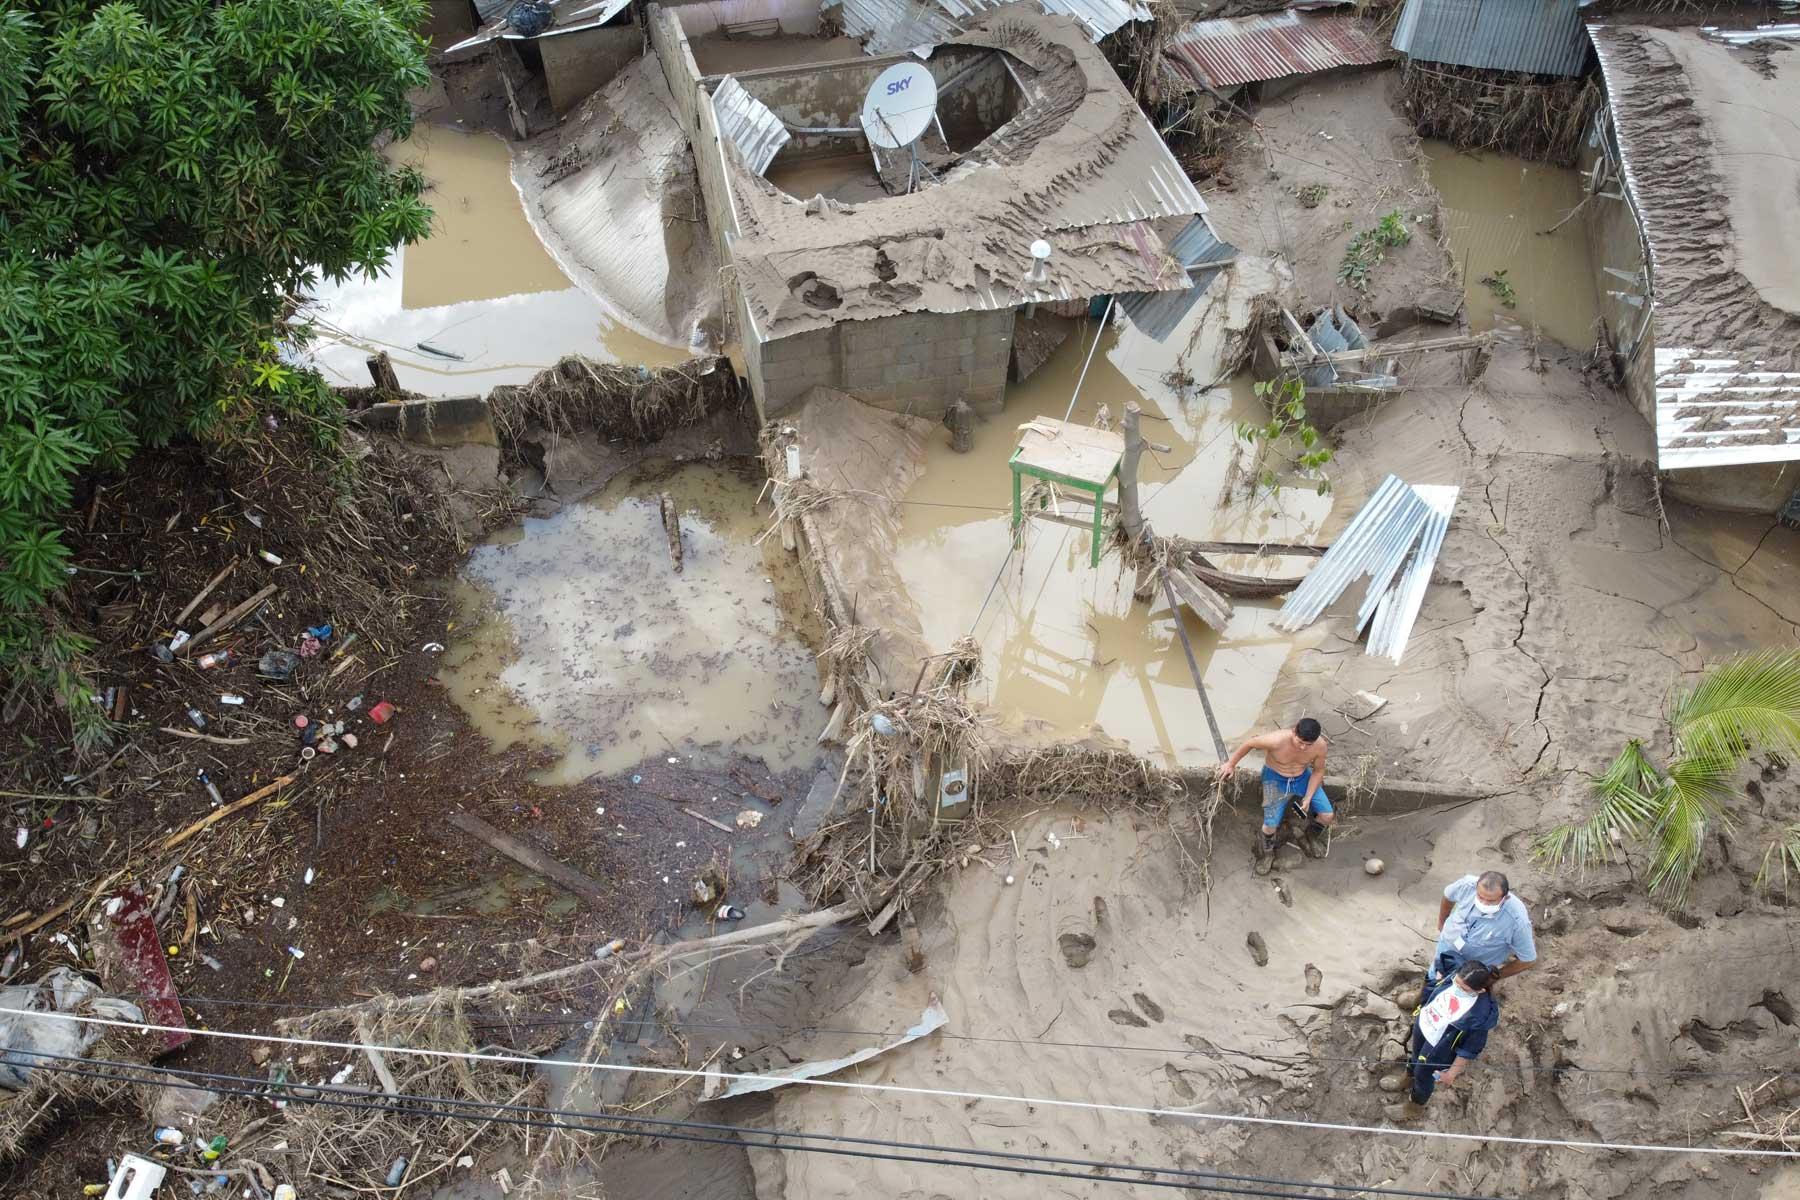 Extreme weather events: LWF representative Carlos Rivera (with white face mask) visiting ChamelecÃ³n, Honduras, where many homes were washed away in unexpected flooding from the hurricanes Eta and Iota in 2020. Photo: LWF/Sean Hawkey